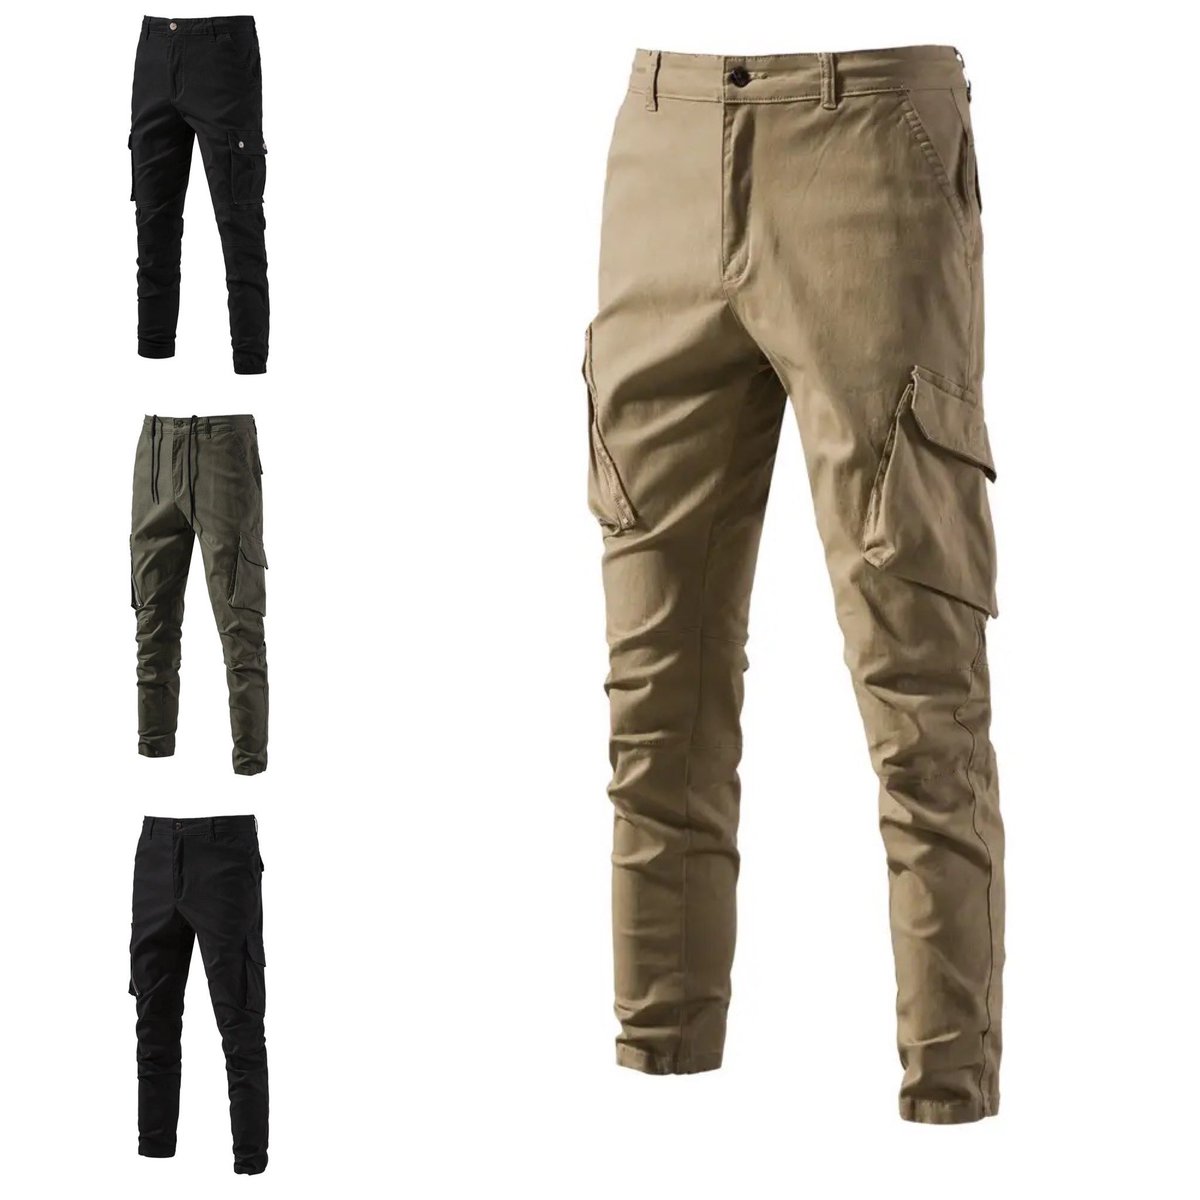 Cargo pants now restocked. Size 30-38 available, call/Whatsapp 0723453479 to order. #cargopants